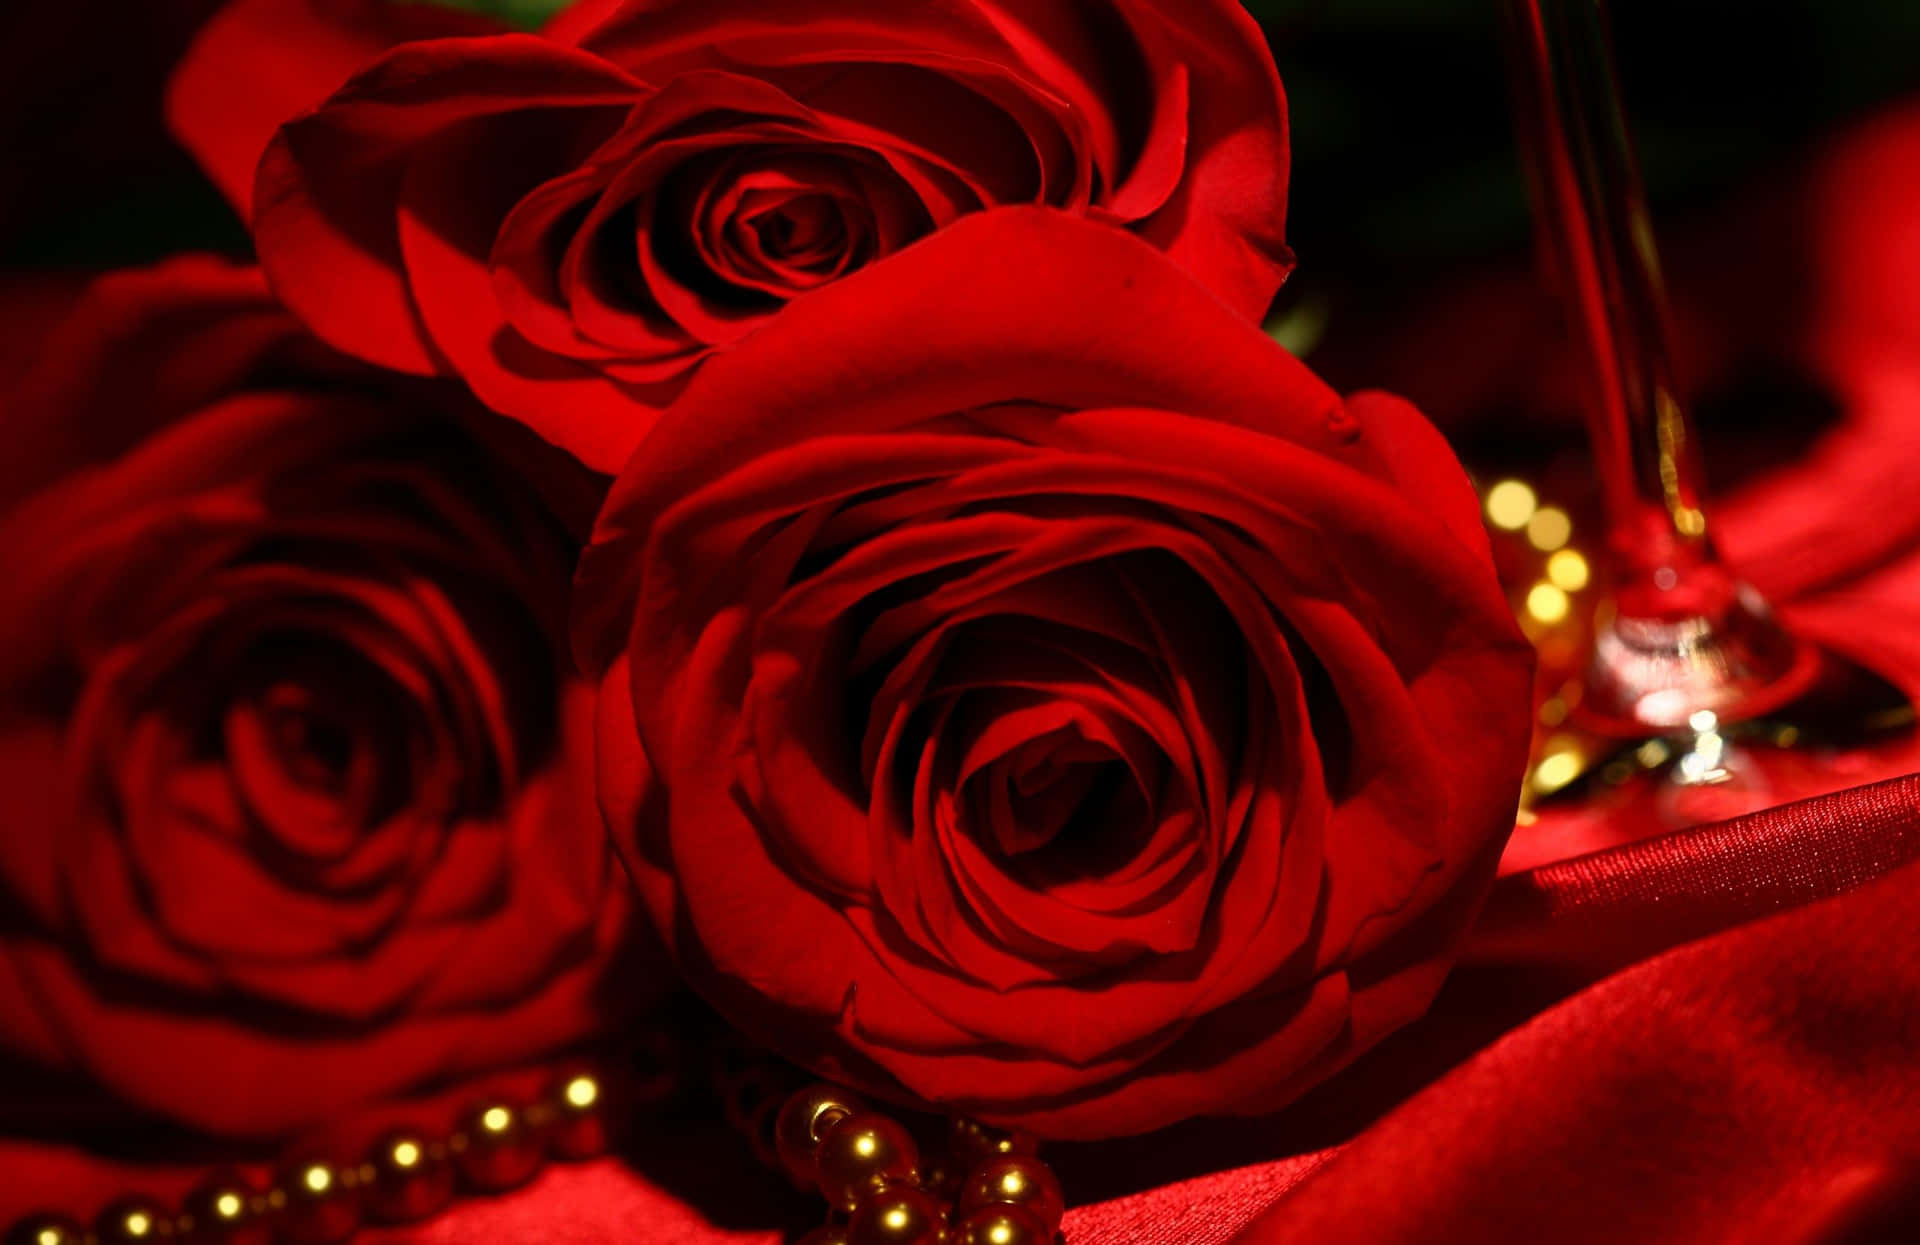 Bright Red Roses Against a Dark Background